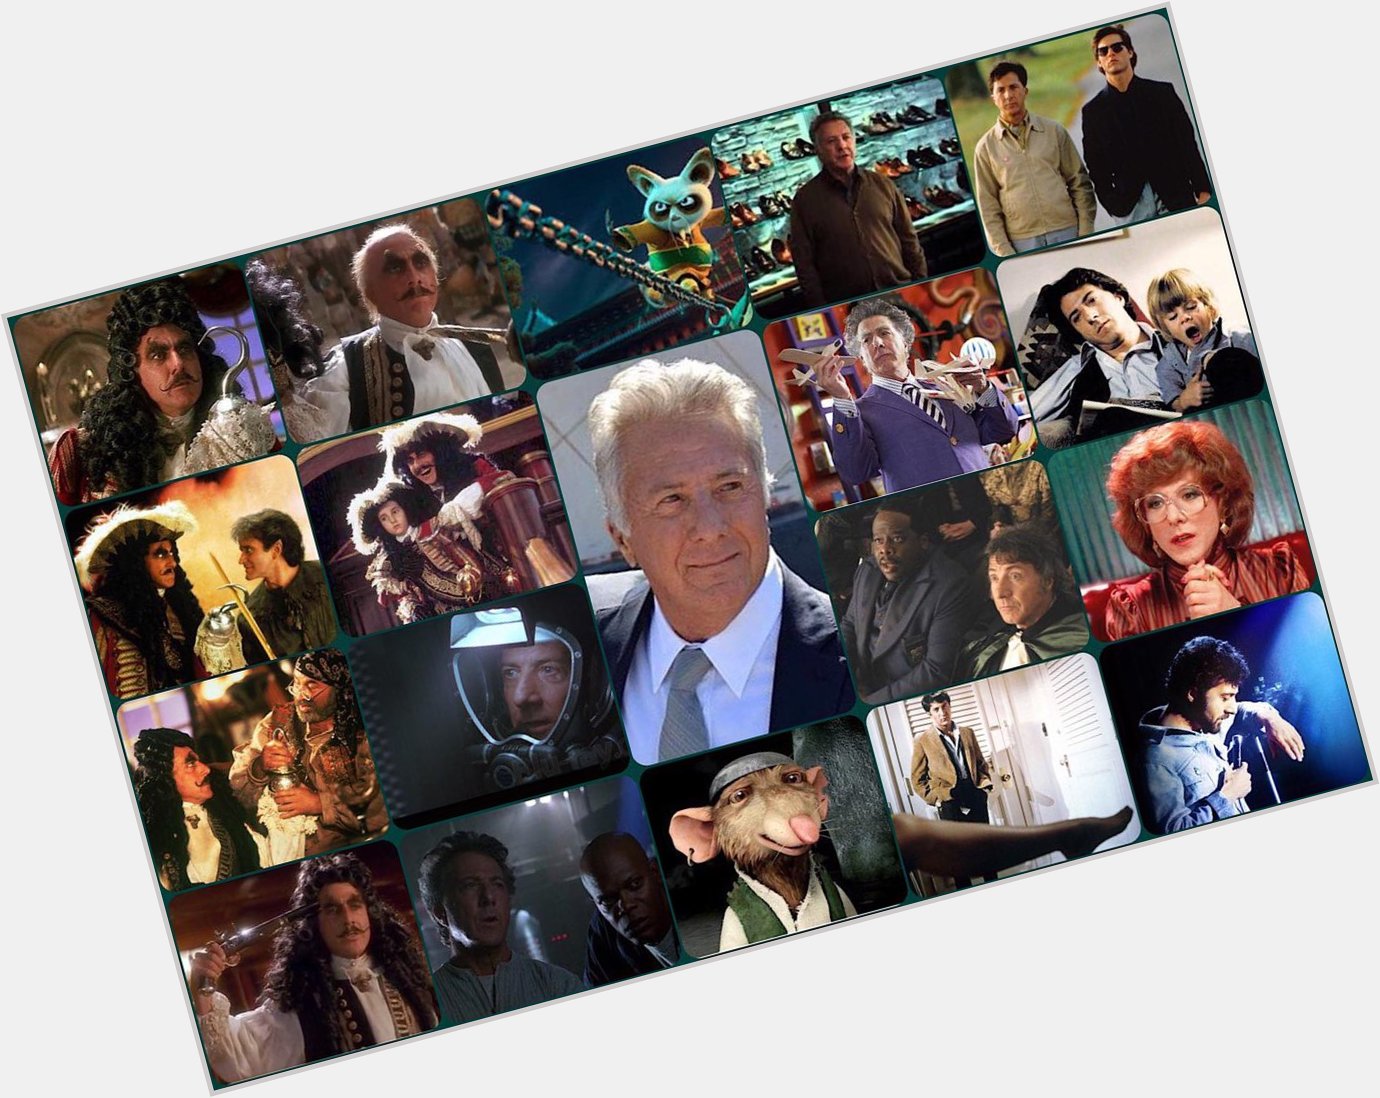 Happy birthday to actor, Dustin Hoffman!! What is your favorite movies that he has been in? 